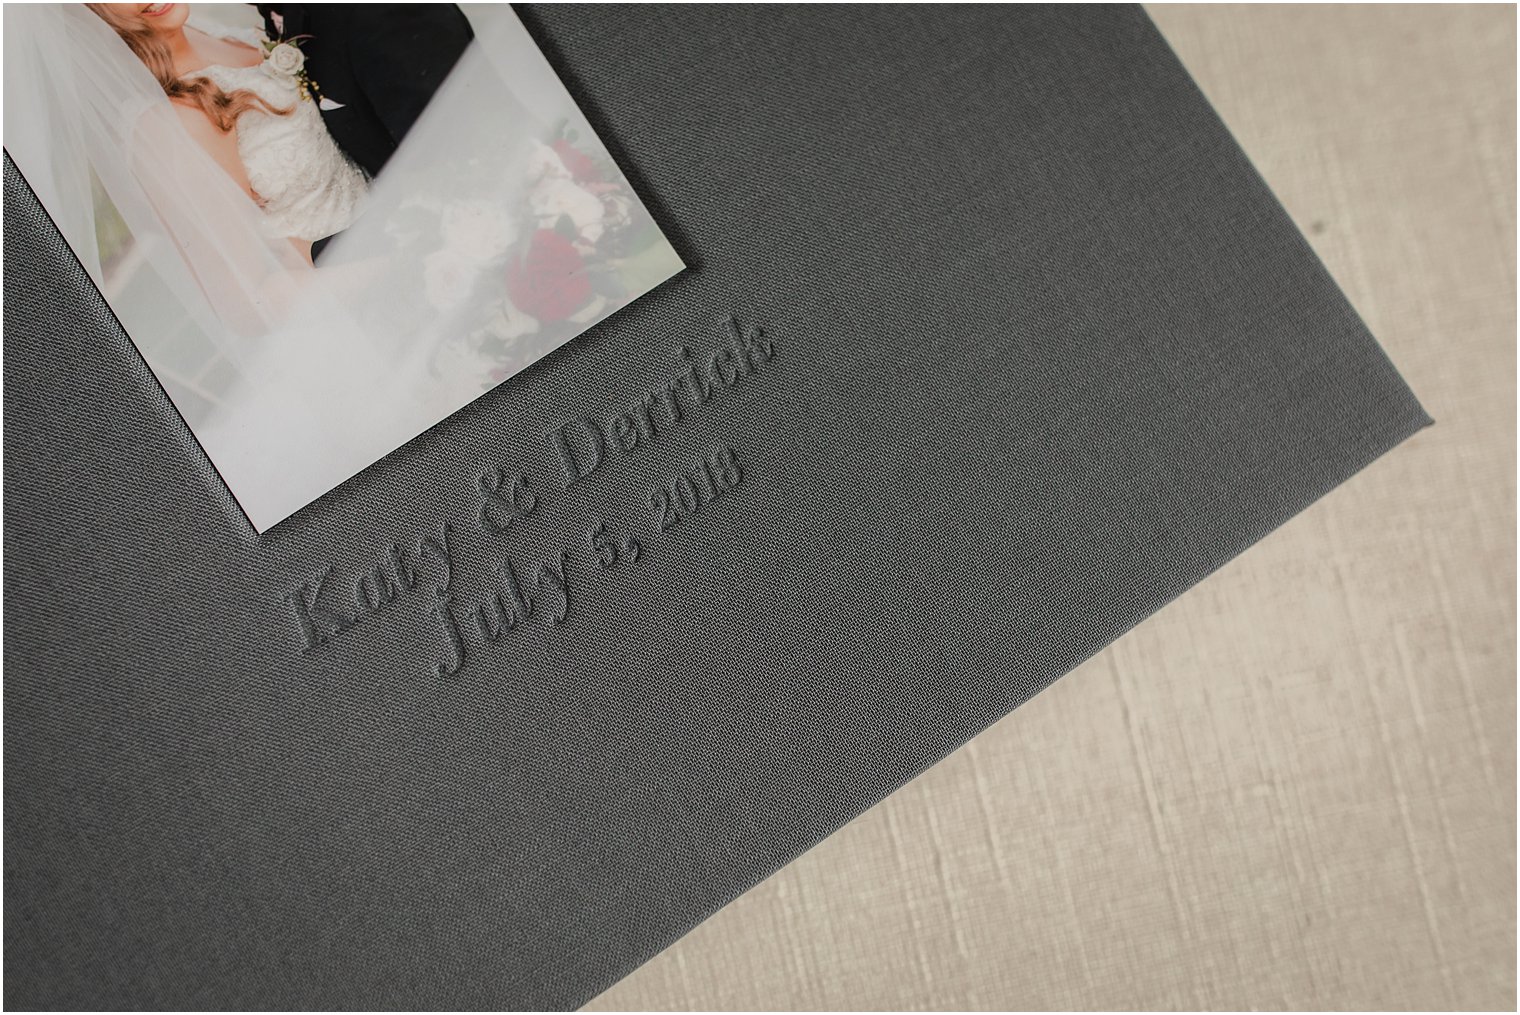 Imprinting on Linen Album for a Summer Wedding at Park Chateau Estate by Idalia Photography